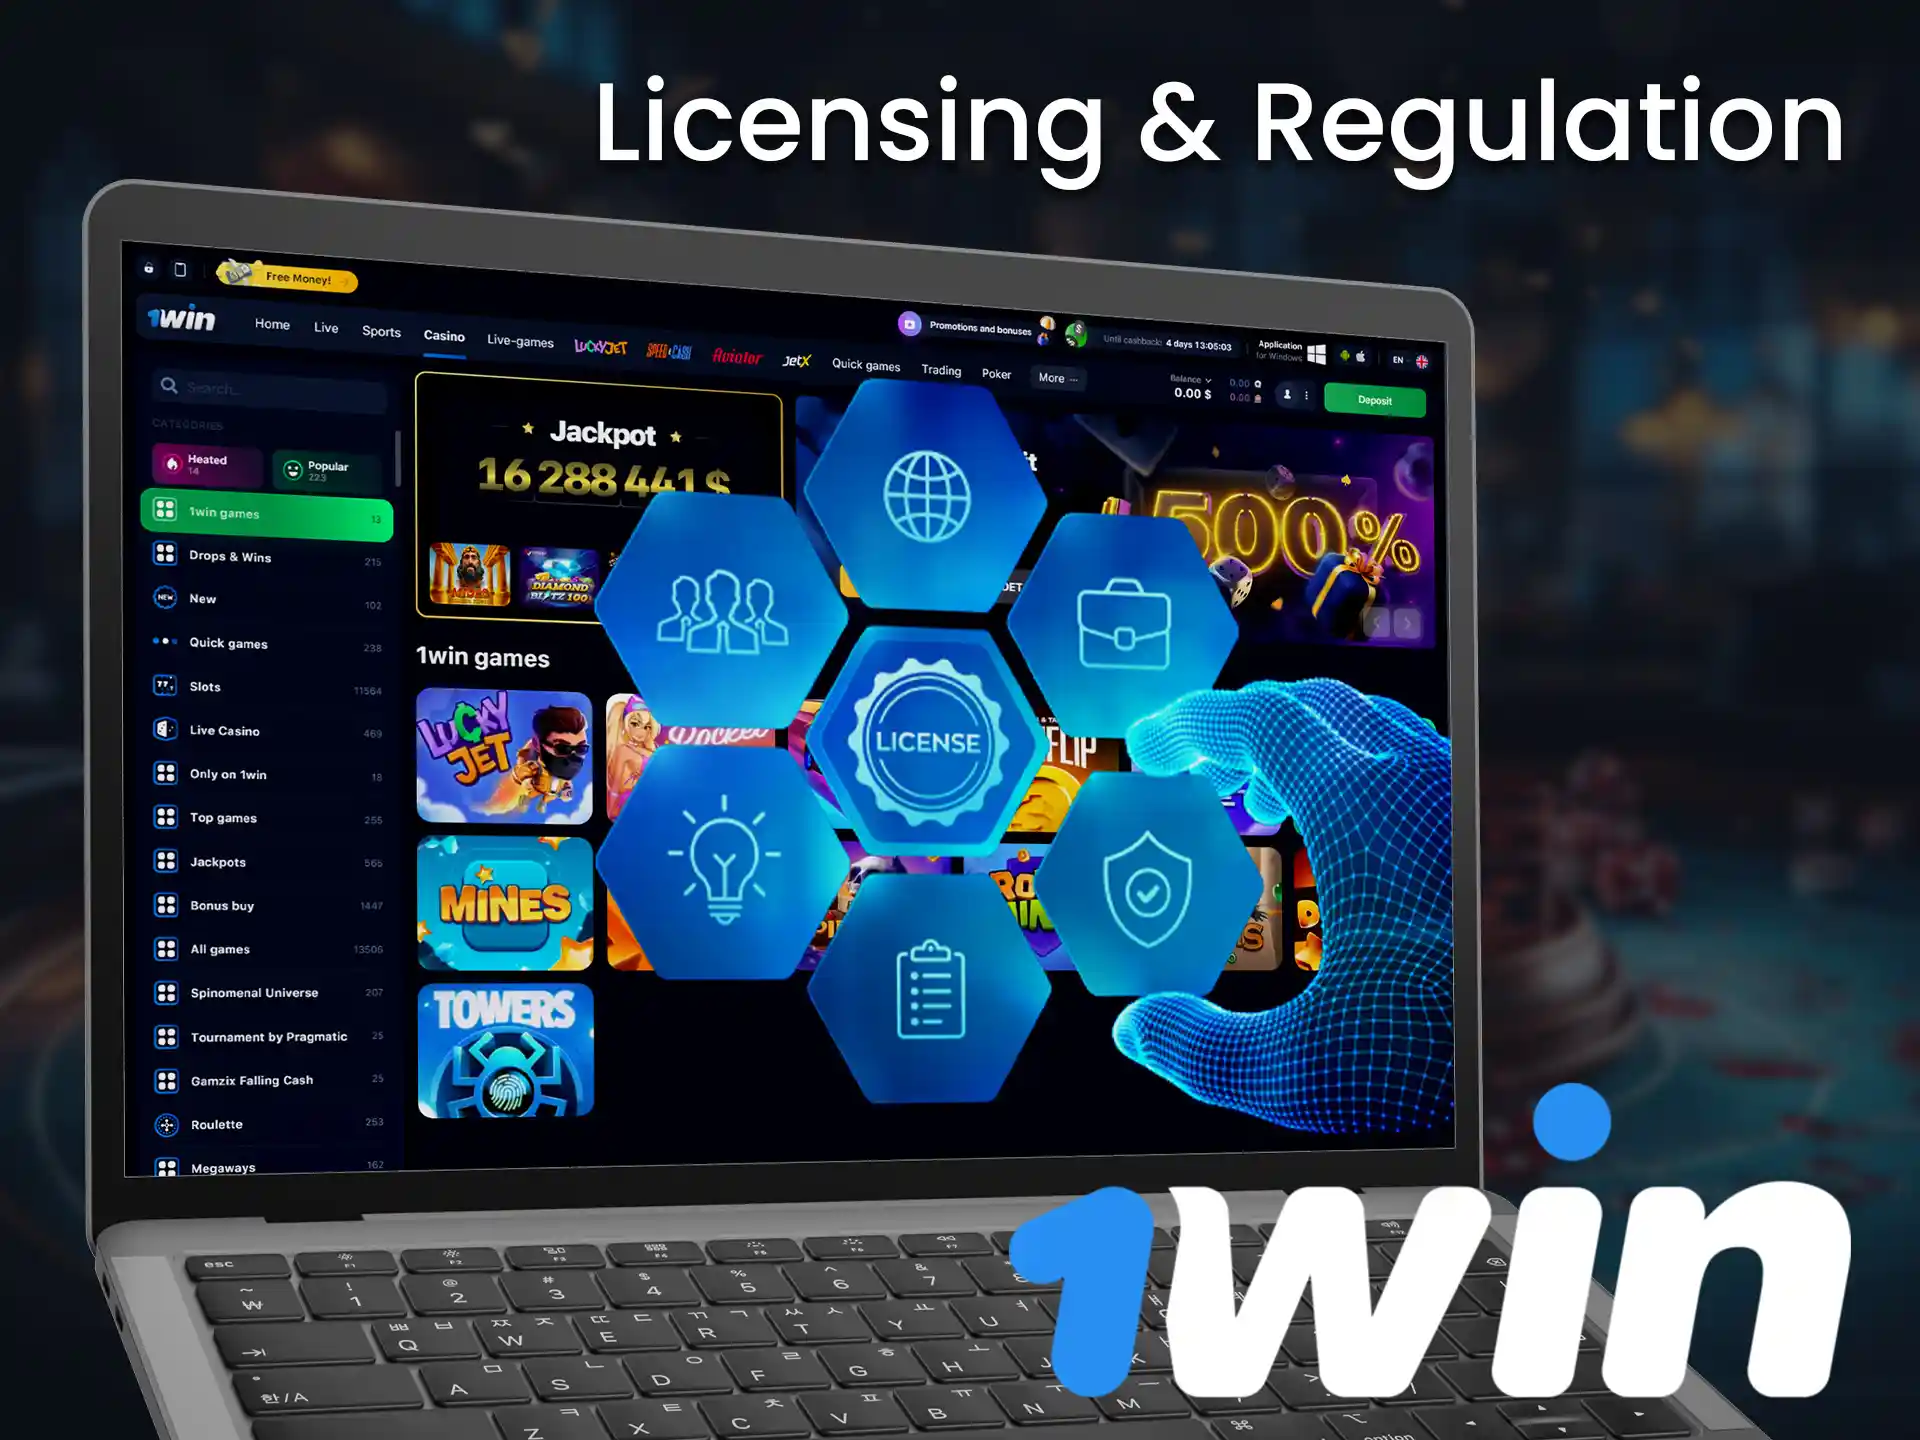 1win has a license that allows you to conduct sports betting and gambling.